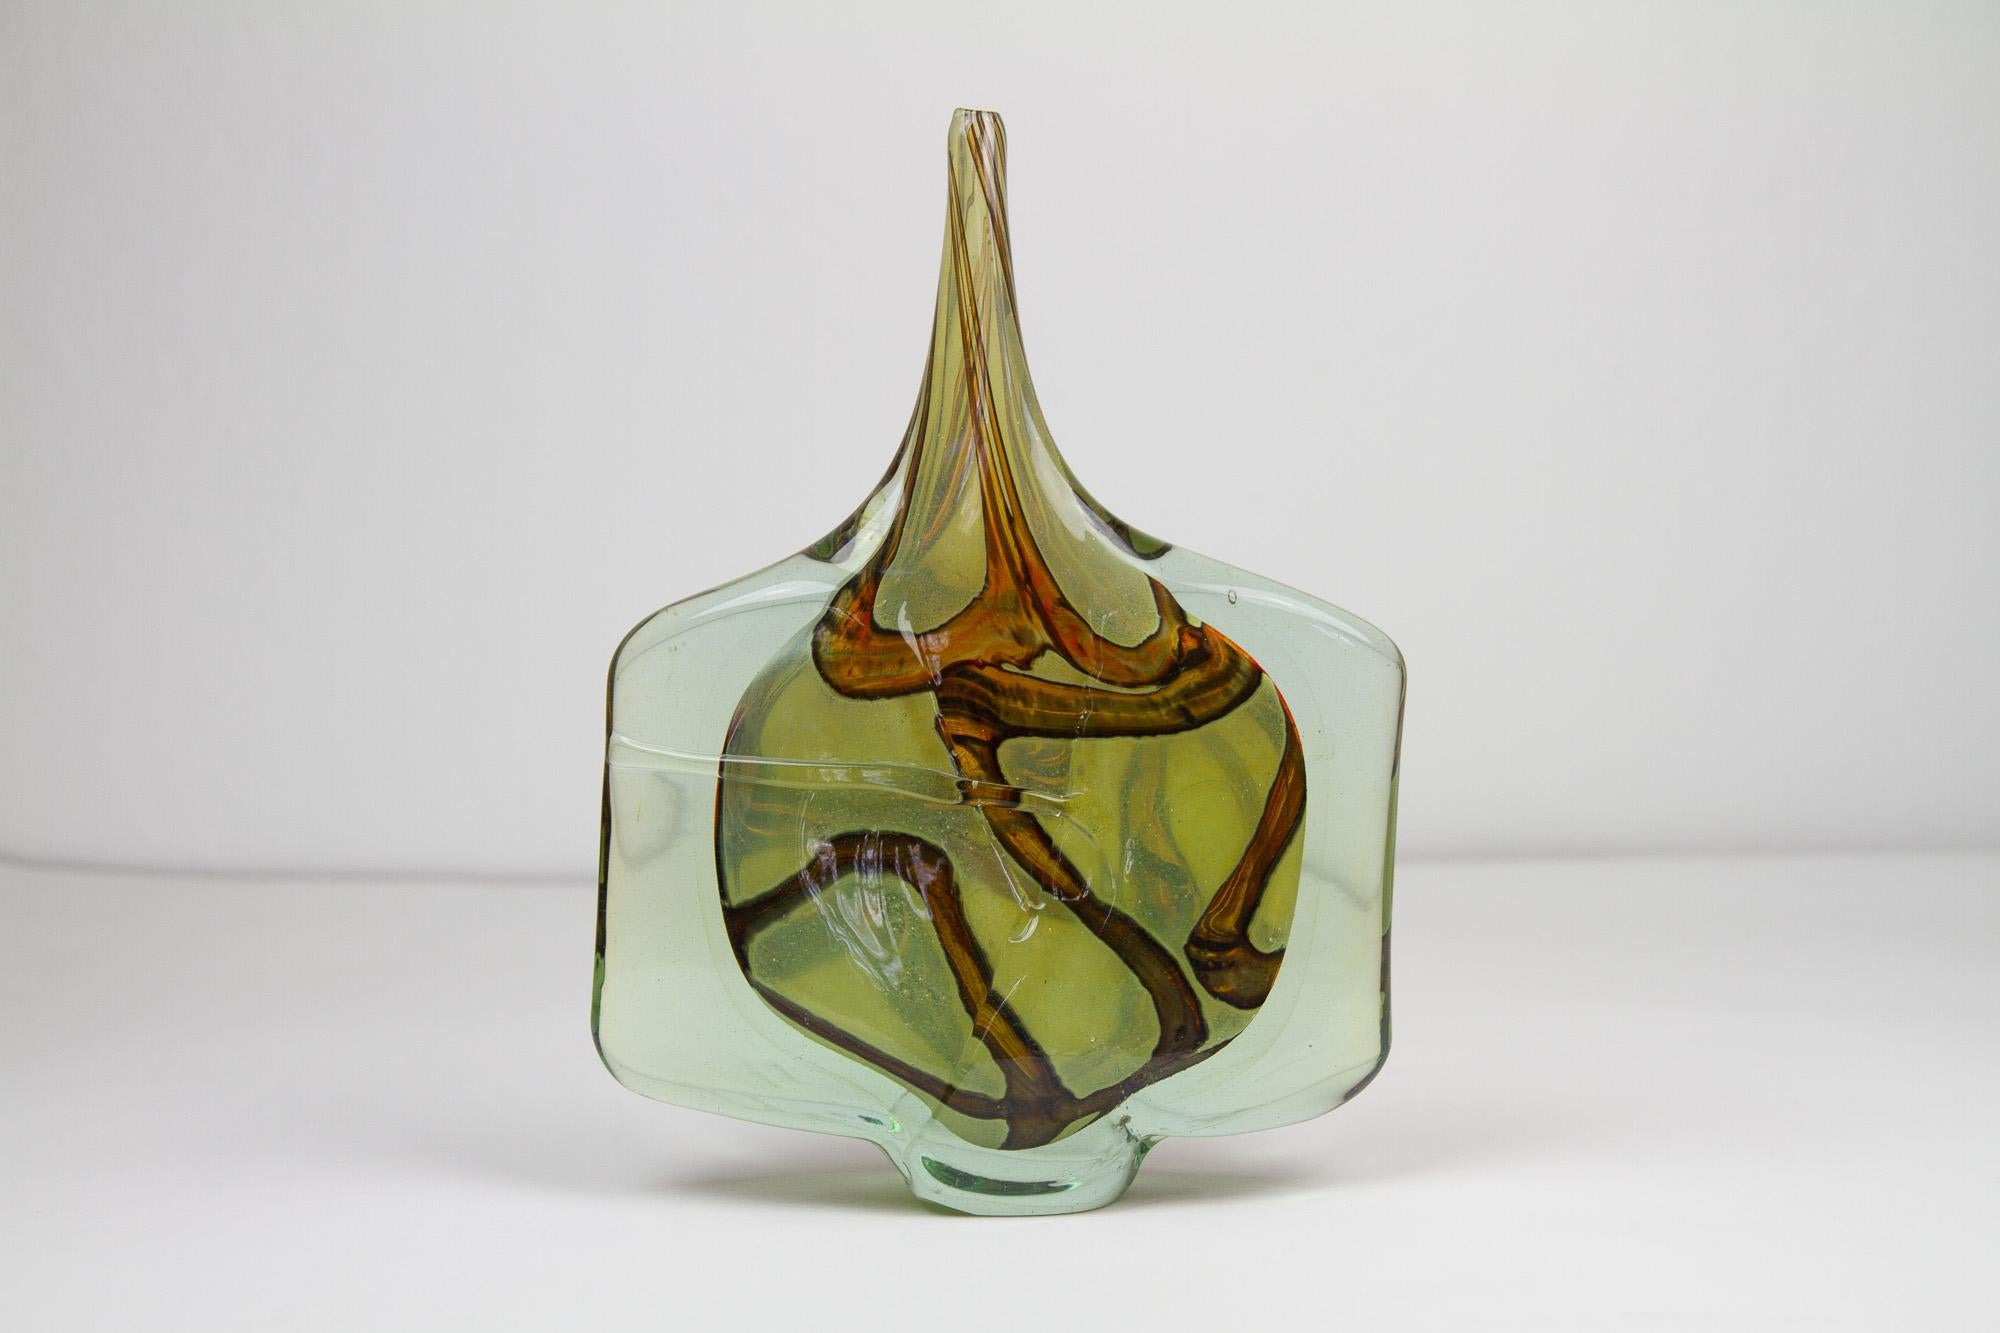 Large Vintage Mdina Glass Fish Vase by Michael Harris, 1980. For Sale 6